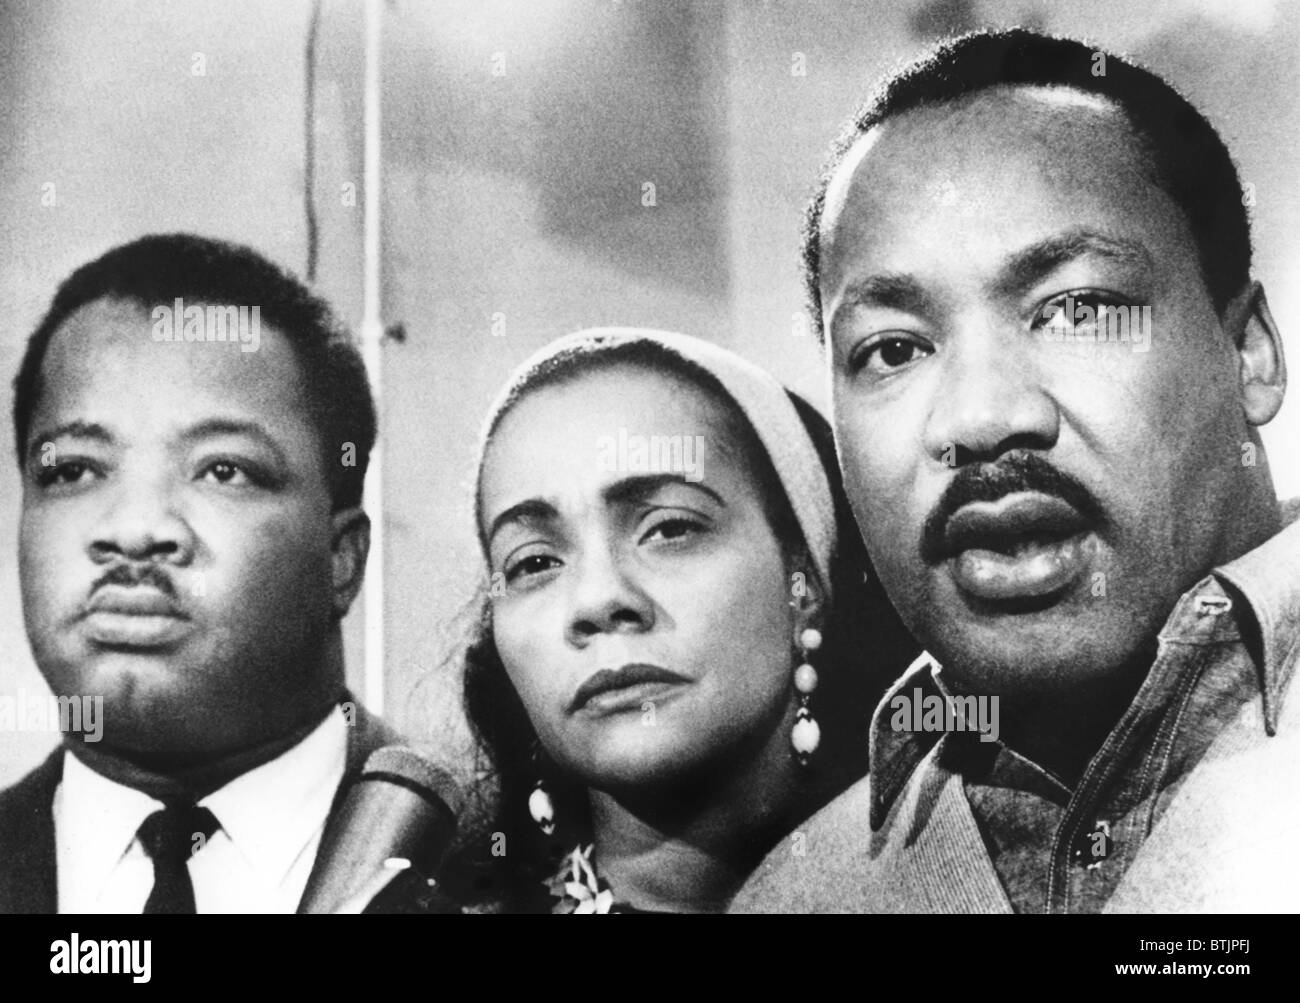 Dr. Martin Luther King (right), with his wife, Coretta <b>Scott King</b> - dr-martin-luther-king-right-with-his-wife-coretta-scott-king-center-BTJPFJ